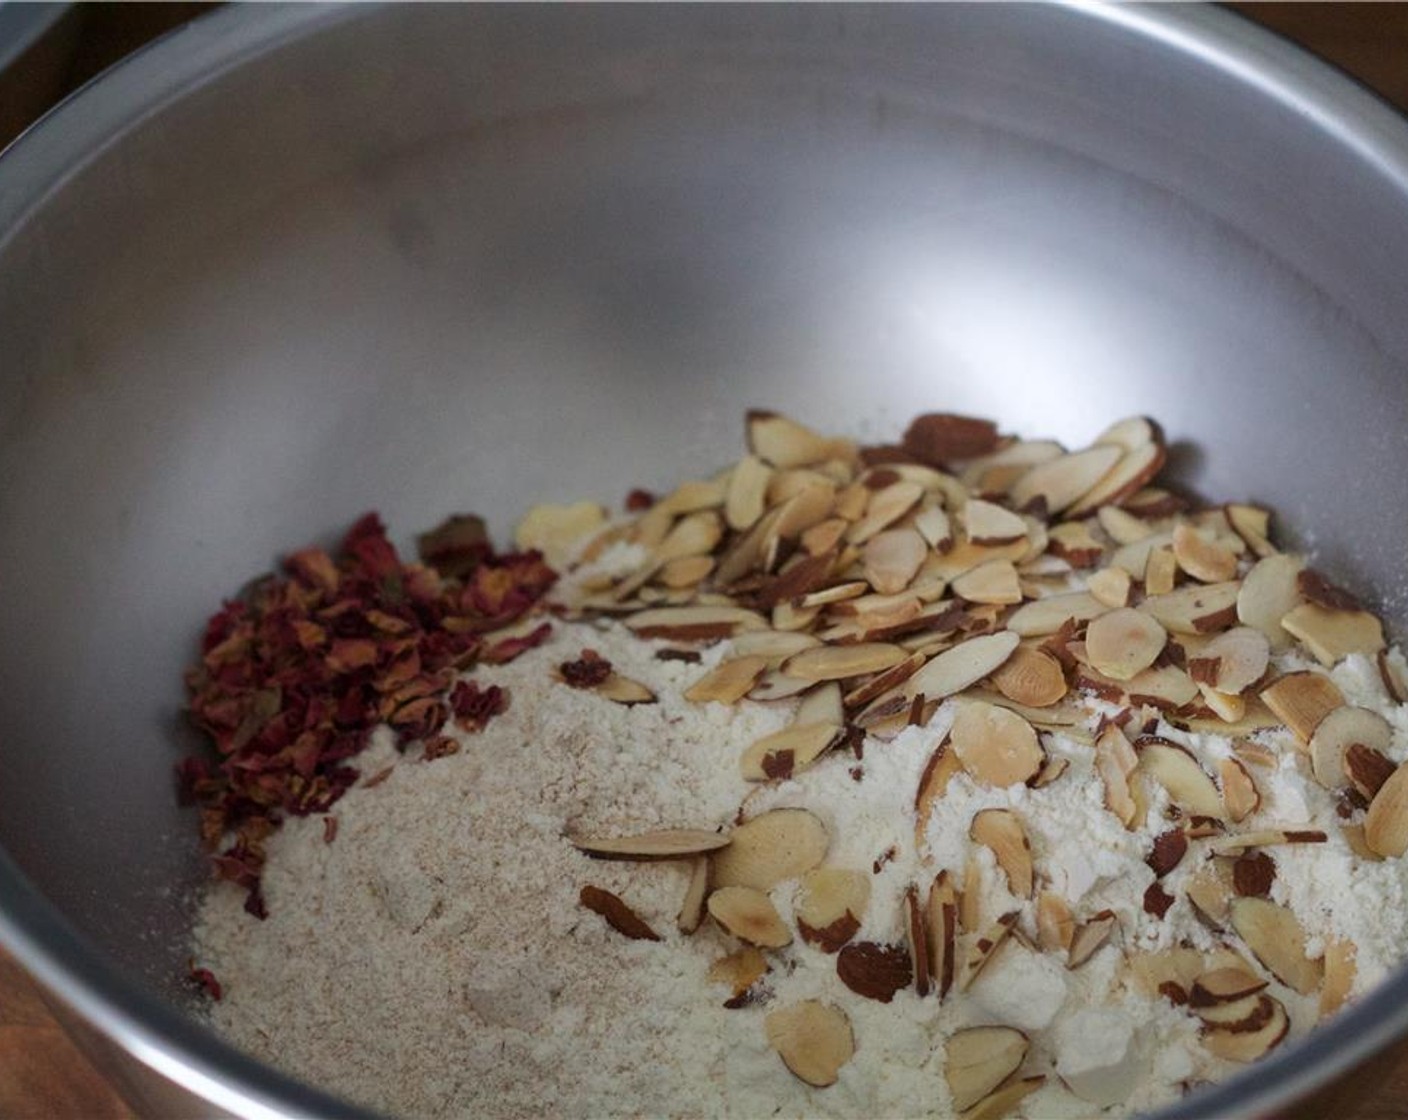 step 2 In a medium bowl, add the almonds, Fine Sea Salt (1/2 tsp), Granulated Sugar (1/2 cup), Whole Wheat Pastry Flour (1 cup), Unbleached All-Purpose Flour (1 cup), and Edible Dried Rose Petals (1 Tbsp) and whisk together. Set aside.